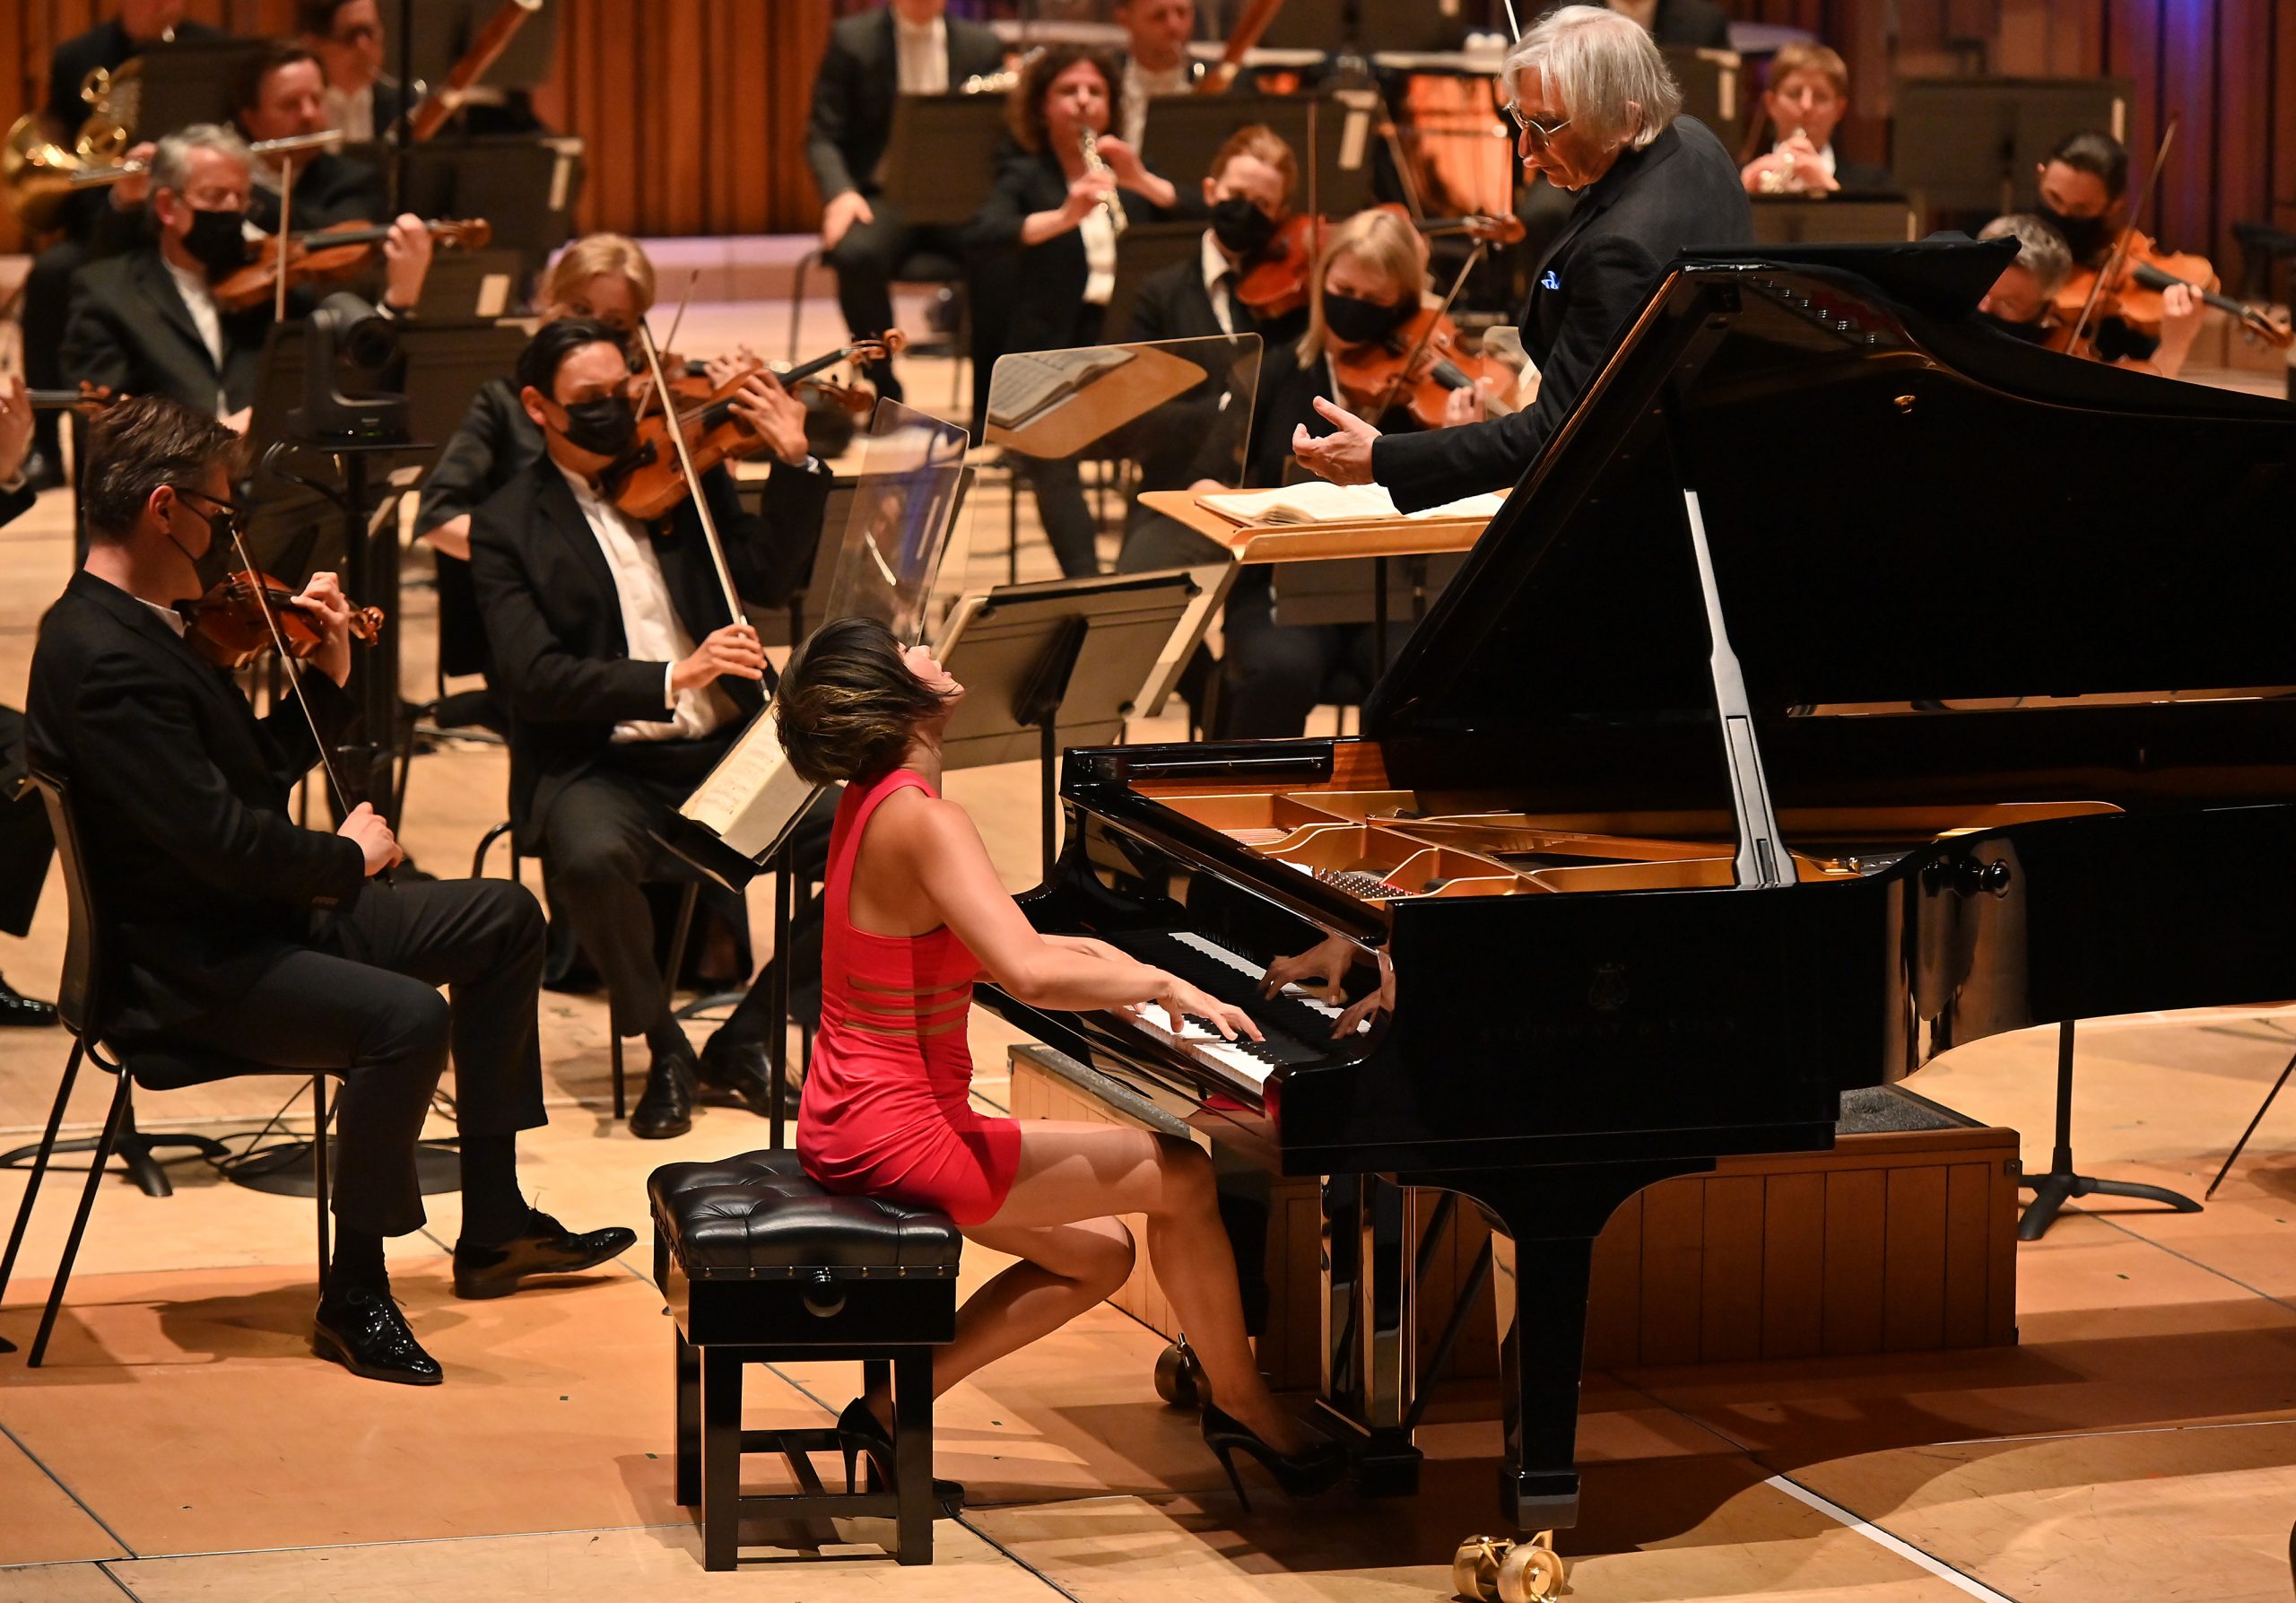 A fabulous event and superb LSO concert from Yuja Wang and Michael